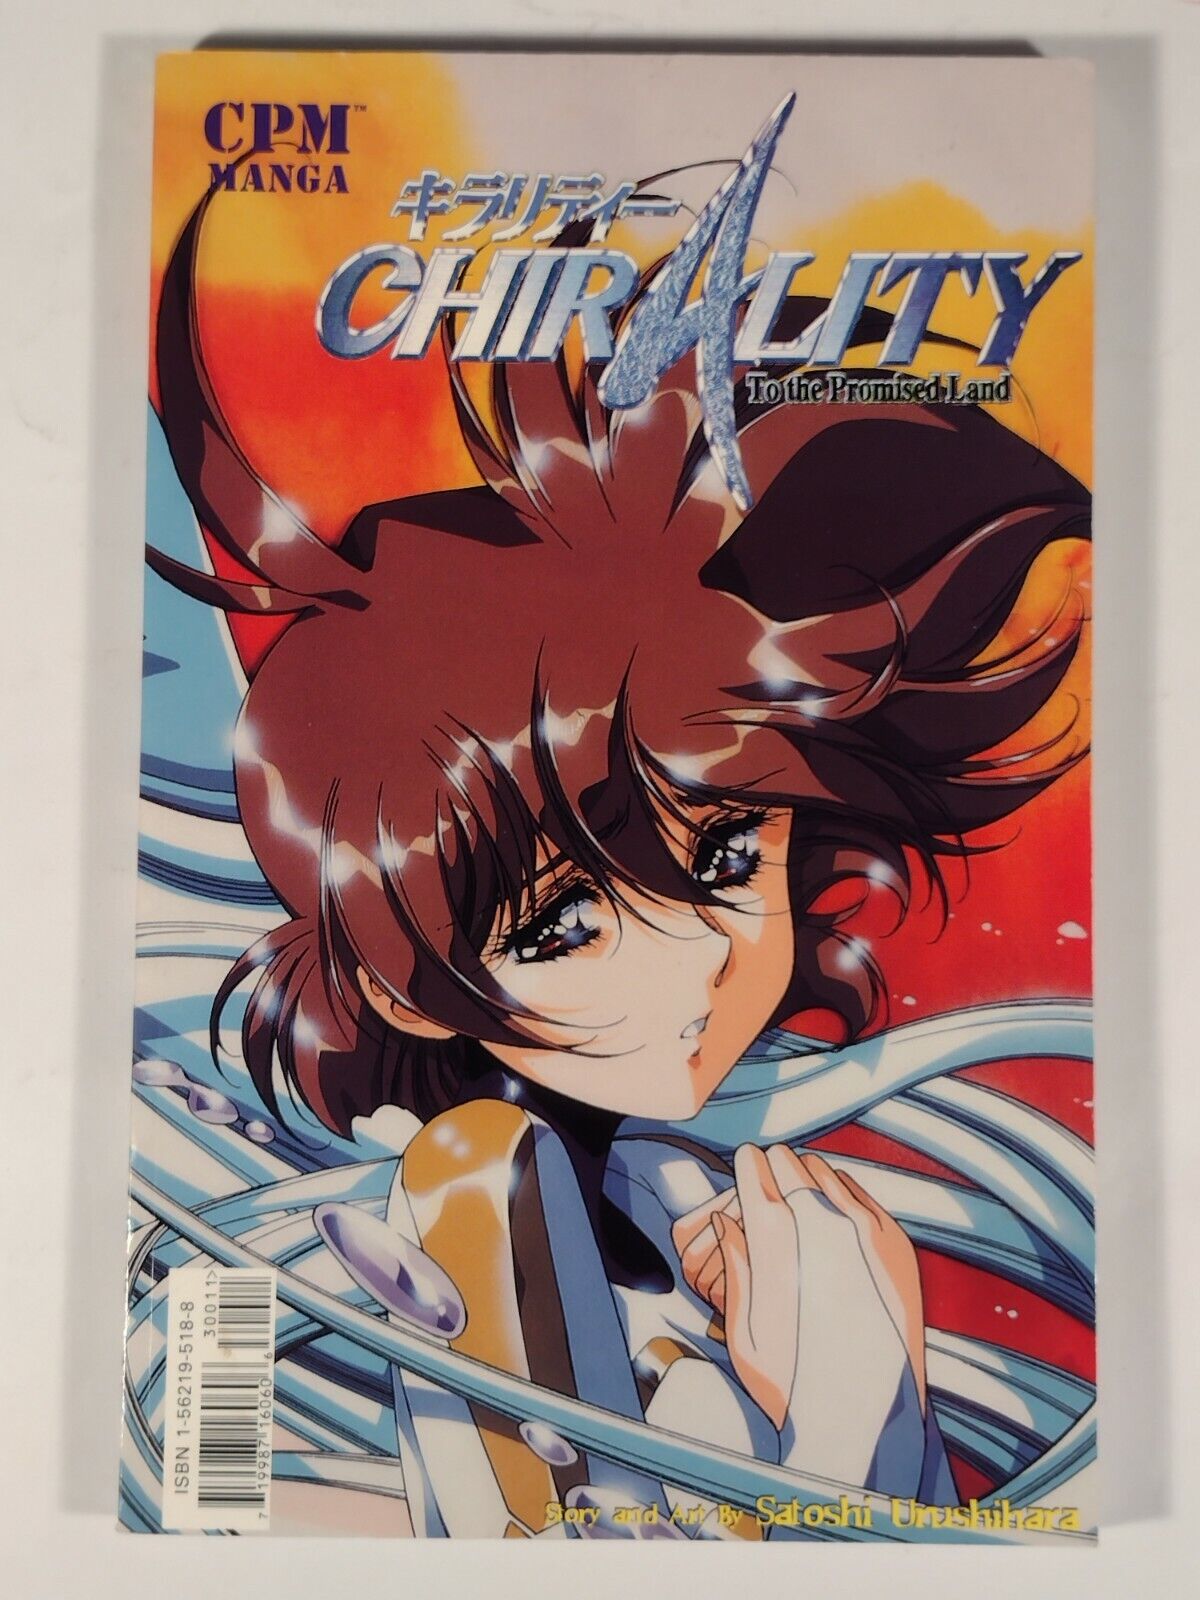 Chirality Book Three - To The Promised Land - TPB GN - CPM Manga 1999